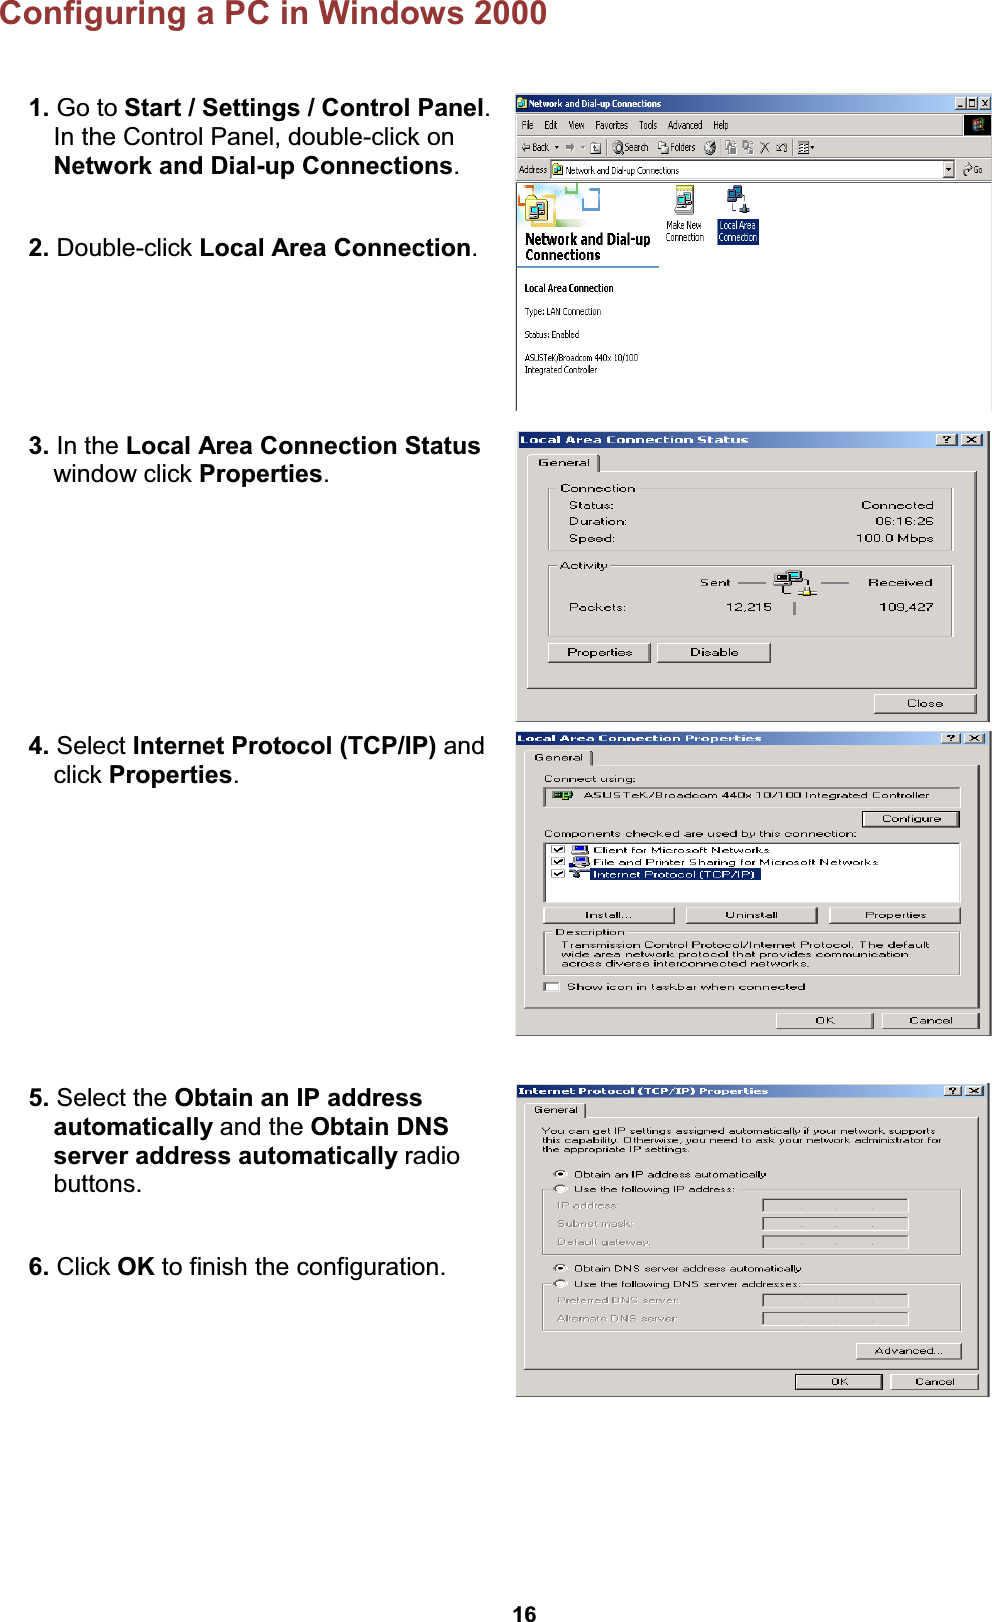  16 Configuring a PC in Windows 2000  1. Go to Start / Settings / Control Panel. In the Control Panel, double-click on Network and Dial-up Connections.  2. Double-click Local Area Connection.   3. In the Local Area Connection Status window click Properties.  4. Select Internet Protocol (TCP/IP) and click Properties.  5. Select the Obtain an IP address automatically and the Obtain DNS server address automatically radio buttons.  6. Click OK to finish the configuration.    